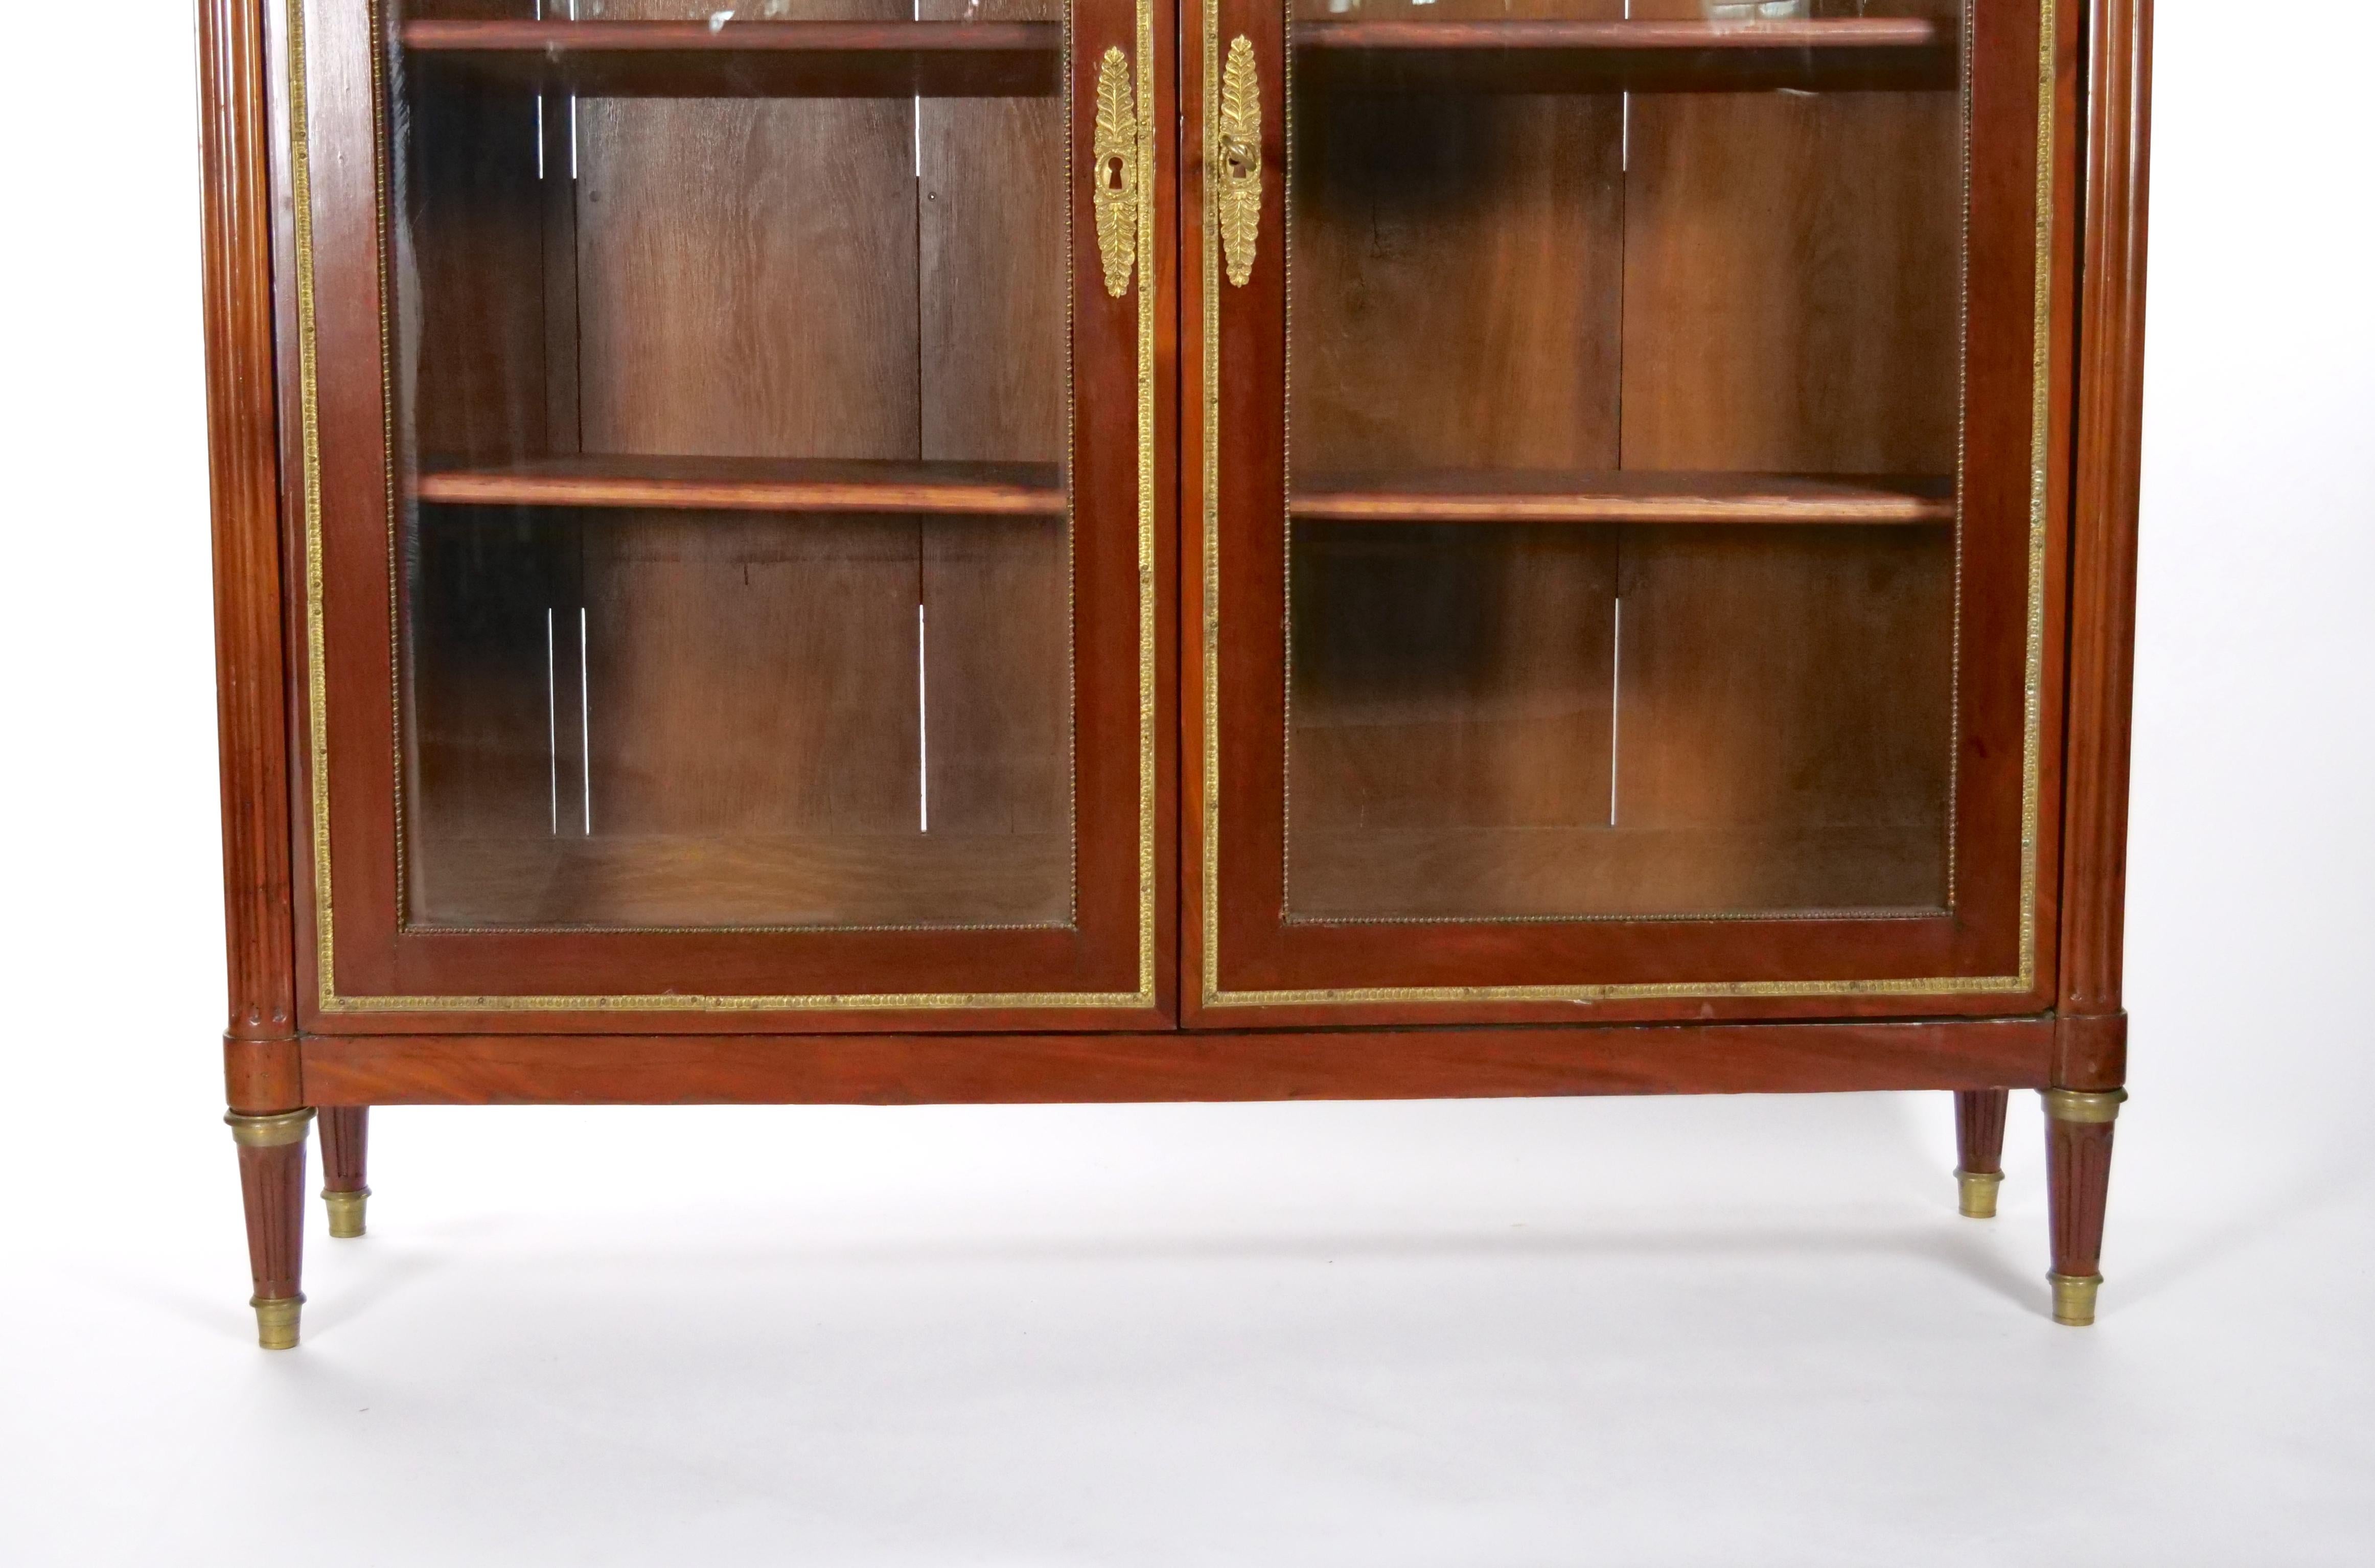 19th Century French Louis XVI Style Mahogany Marble Top Vitrine / Bookcase For Sale 5